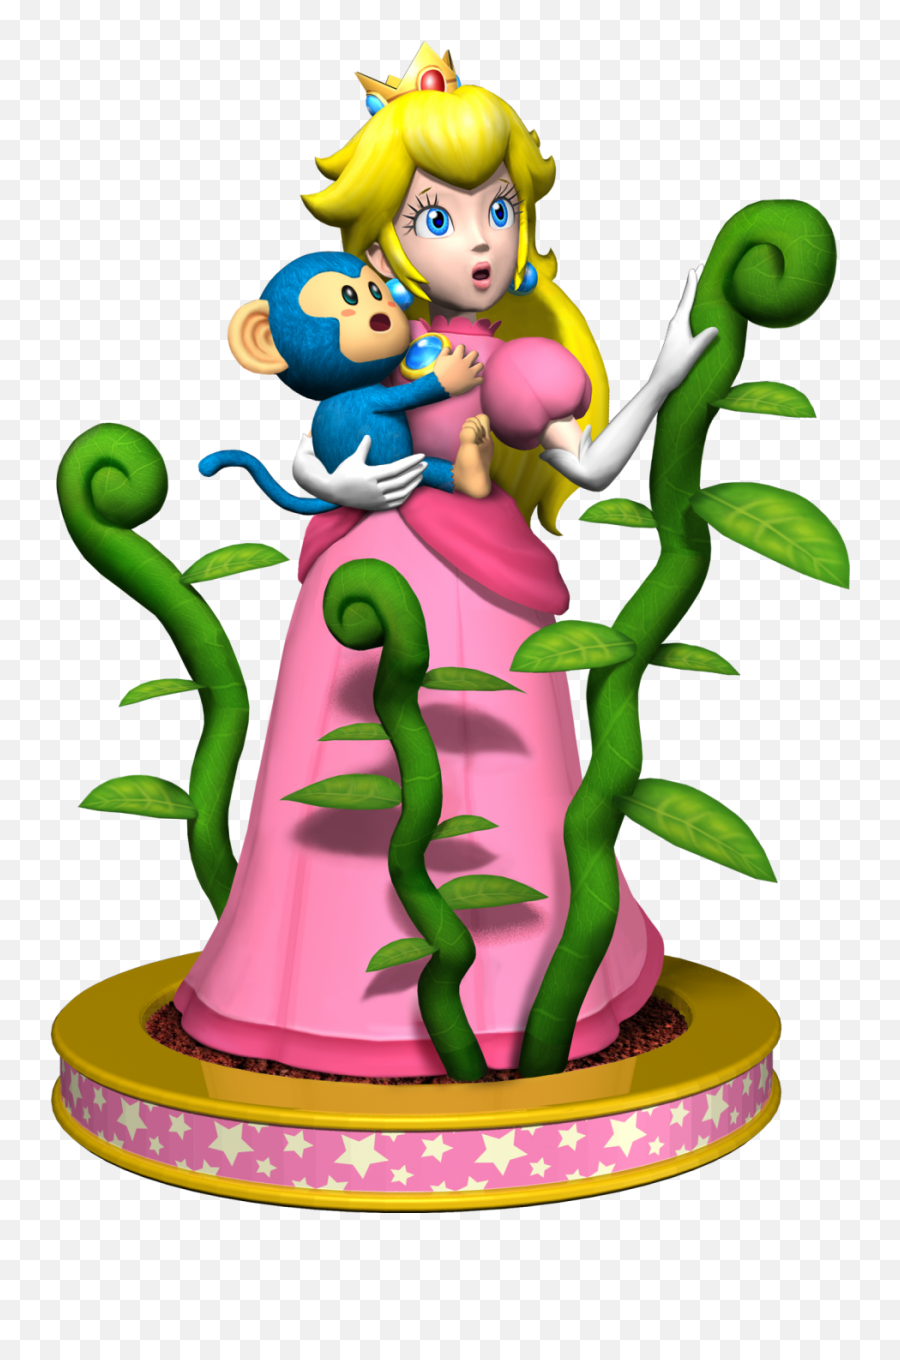 Download Princess Peach Clipart Mario Party Png Image With - Super Mario Galaxy The Chimp,Mario Party Png